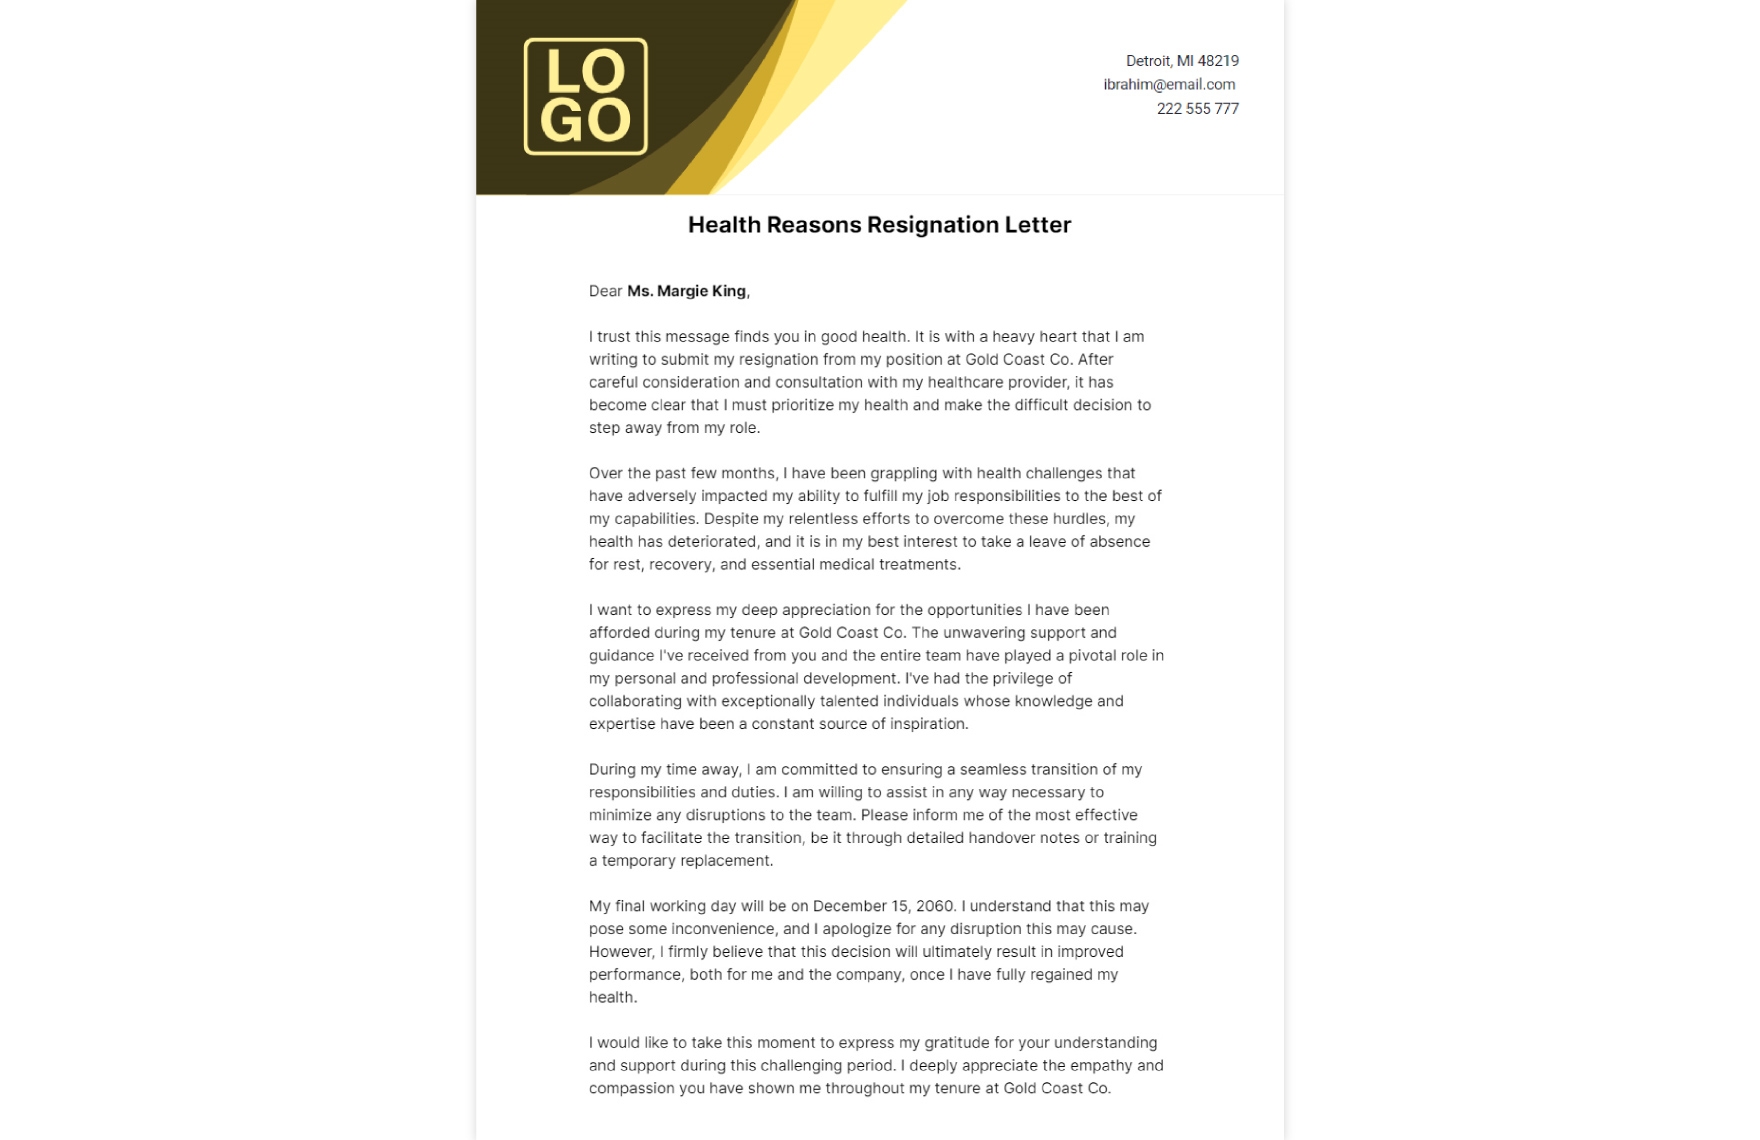 Health Reasons Resignation Letter  Template